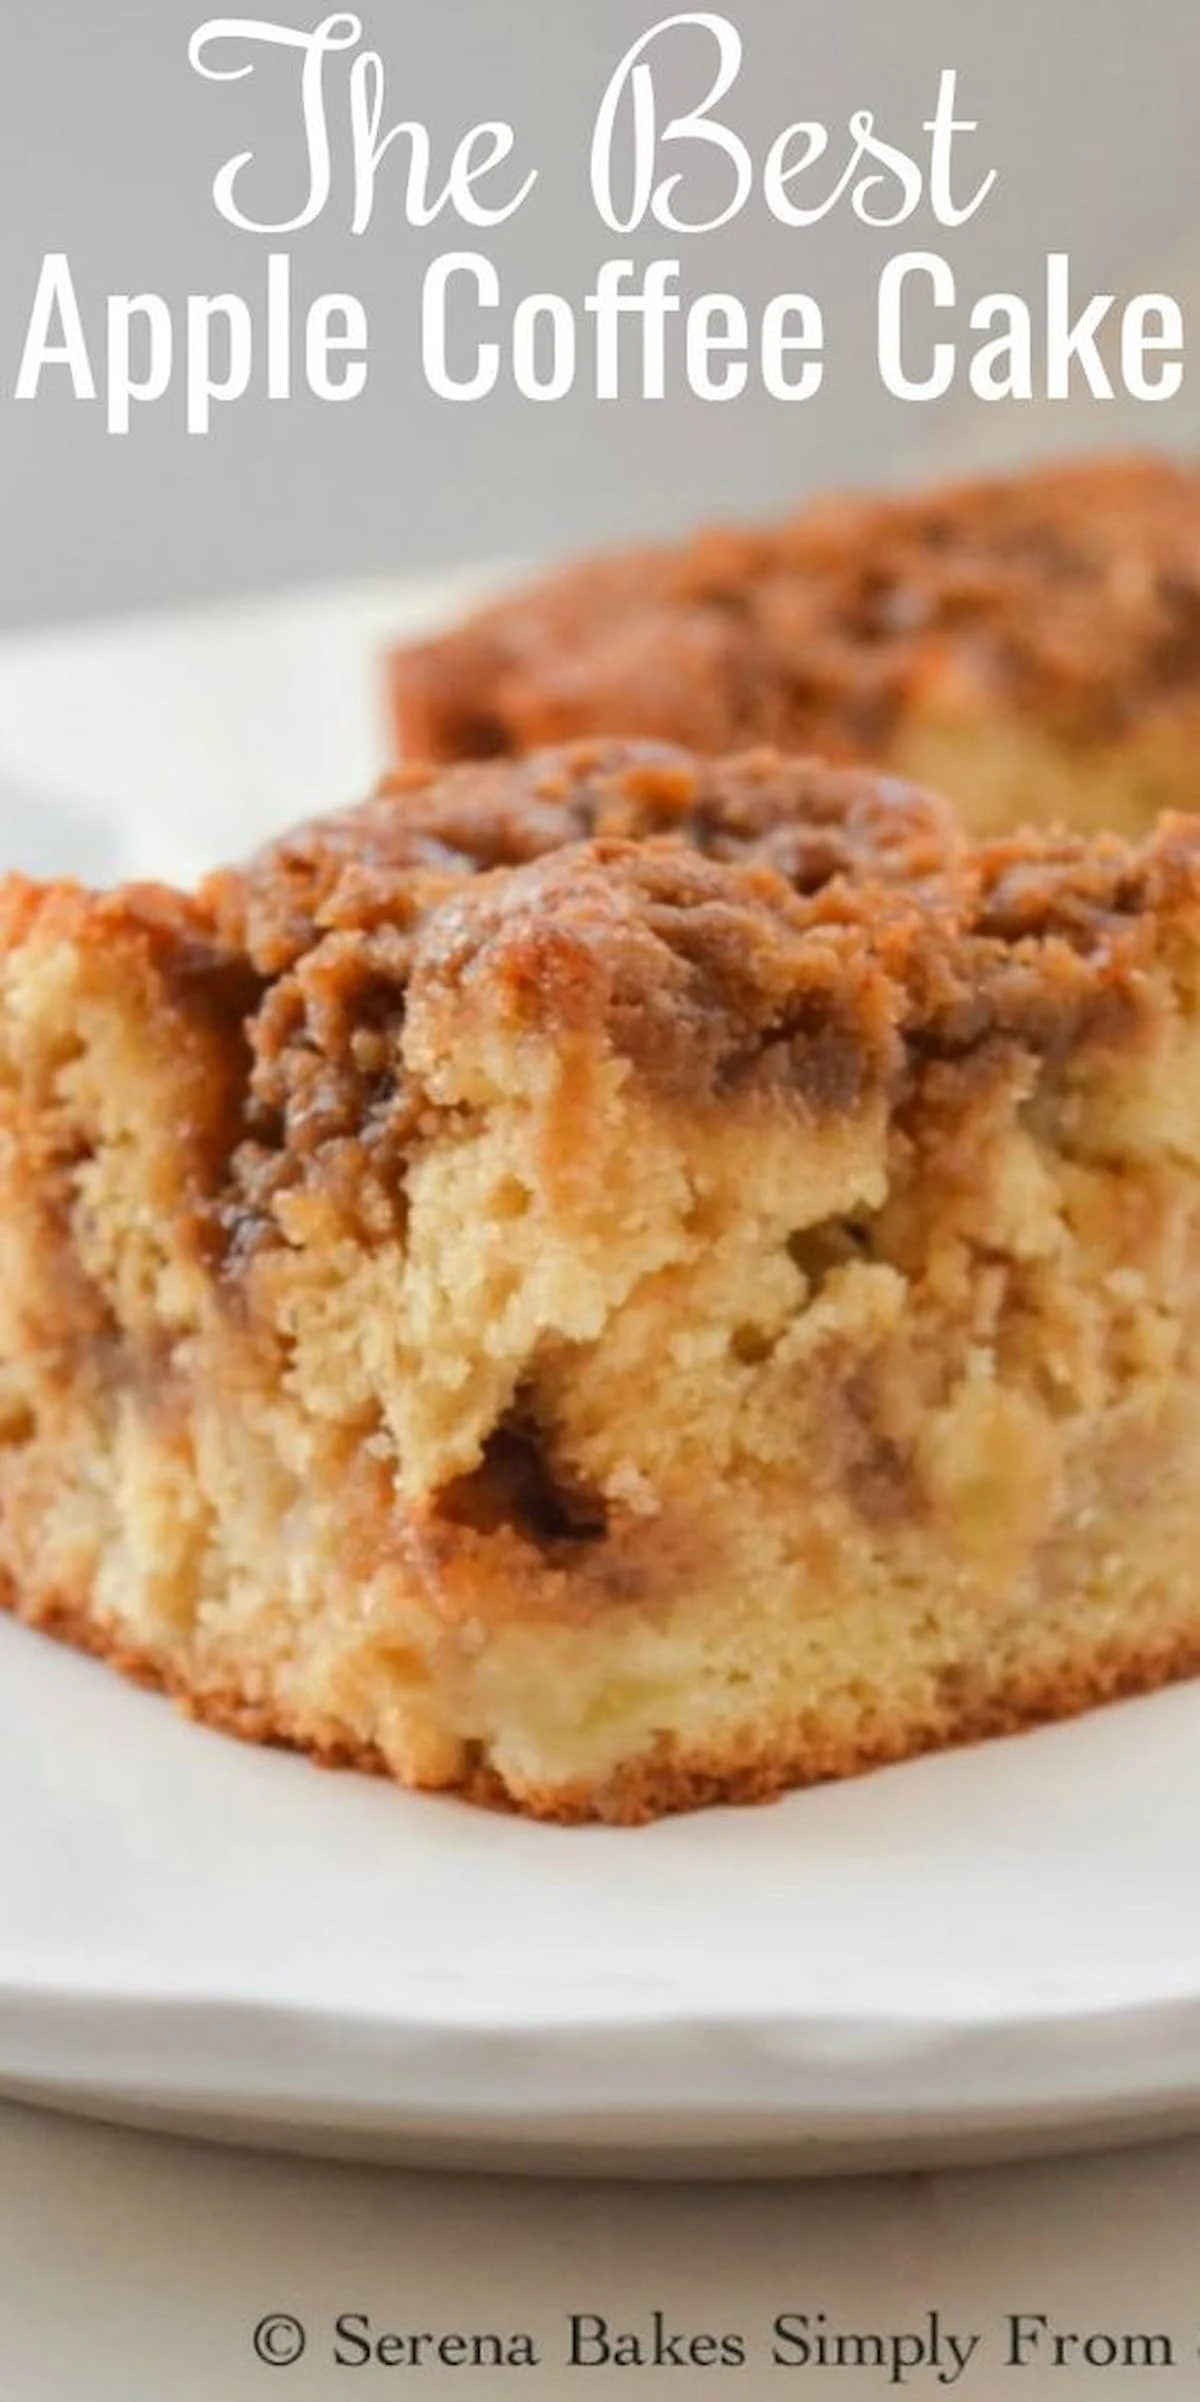 Apple Coffee Cake with Brown Sugar Crumb with white text at the top The BEST Apple Coffee Cake.